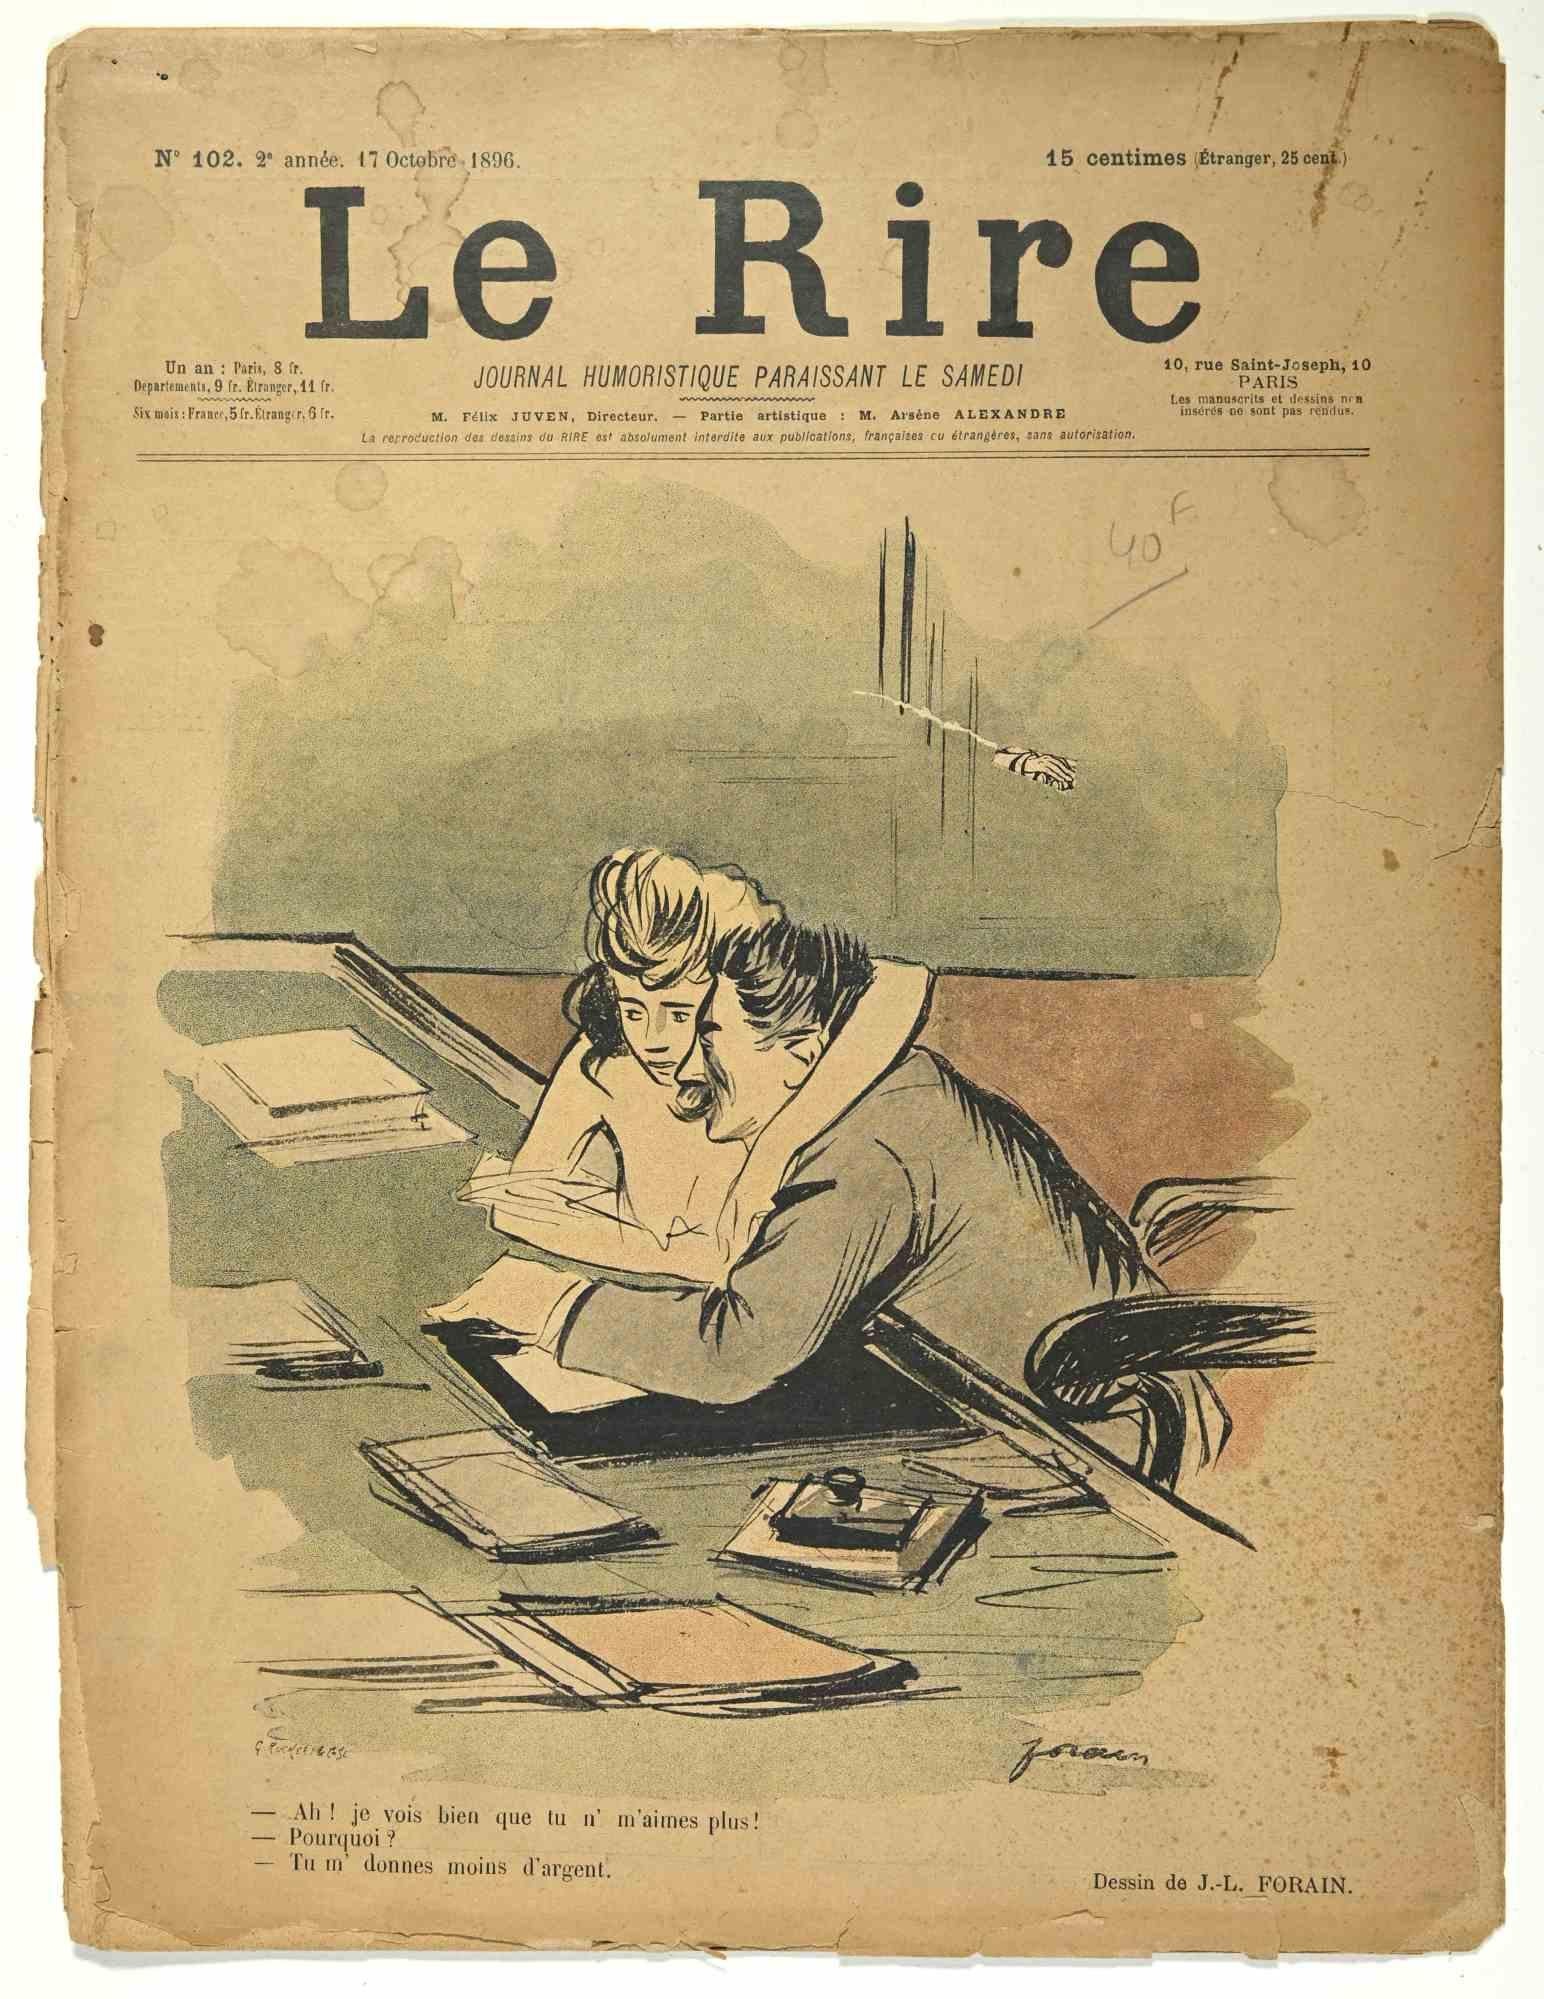 Le Rire is a Comic Magazine published in October 1896, reproducing drawings by Jean Luis Forain (1852-1931).

Good condition on a yellowed paper, except some torn paper on the left margin.

Stamp signed on the lower right corner.

Jean Luis